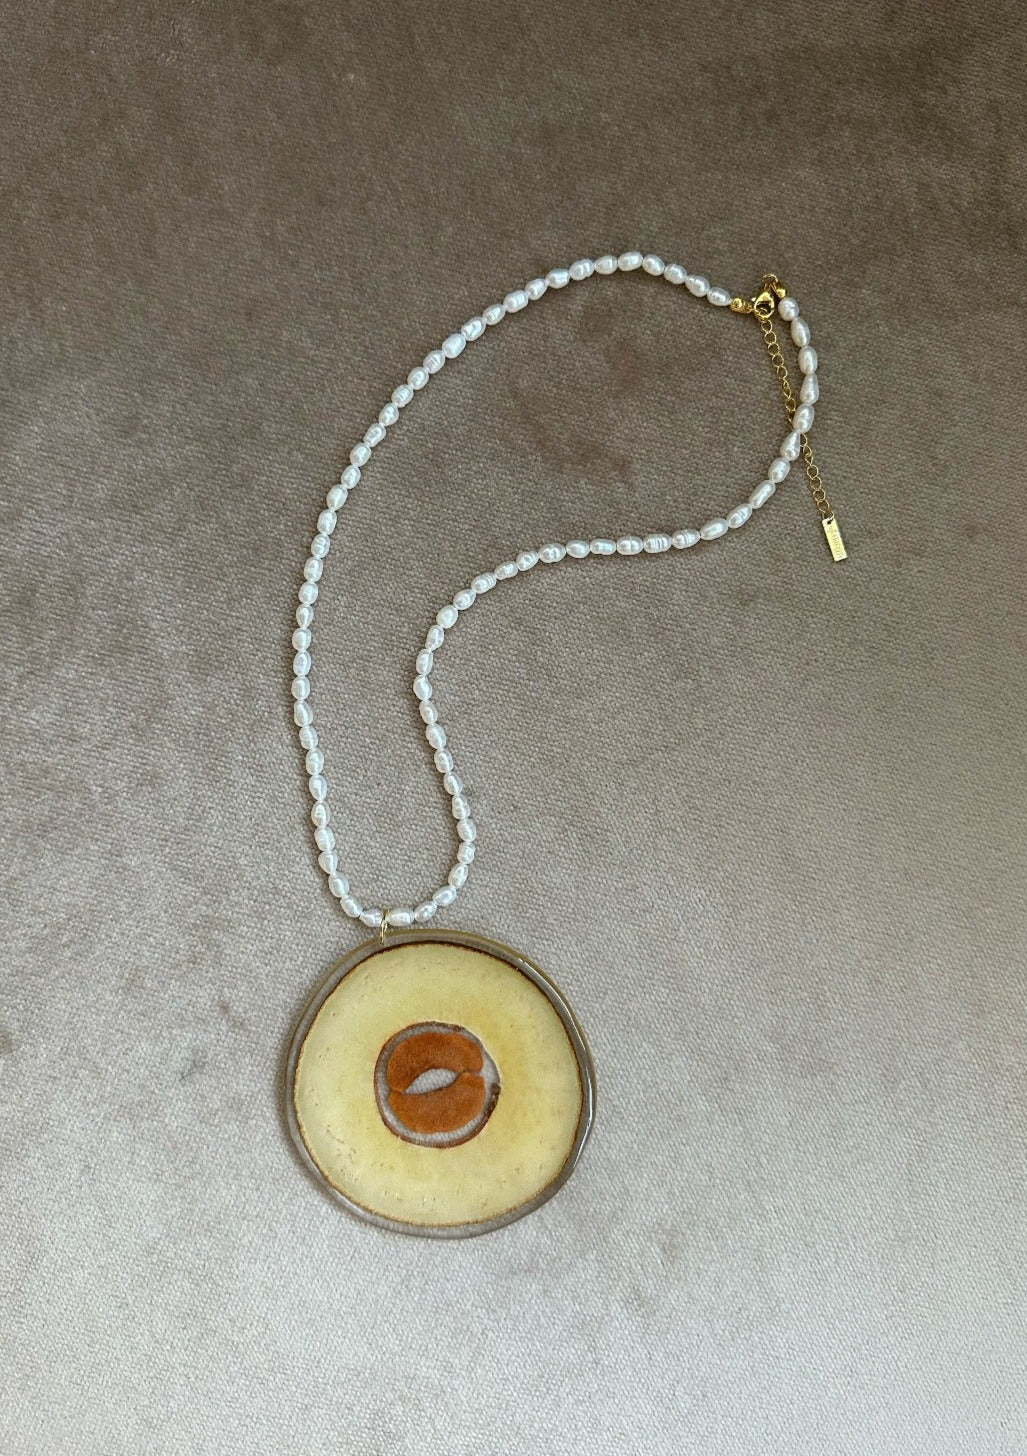 Freshwater rice pearl necklace with a preserved avocado cross-section pendant.